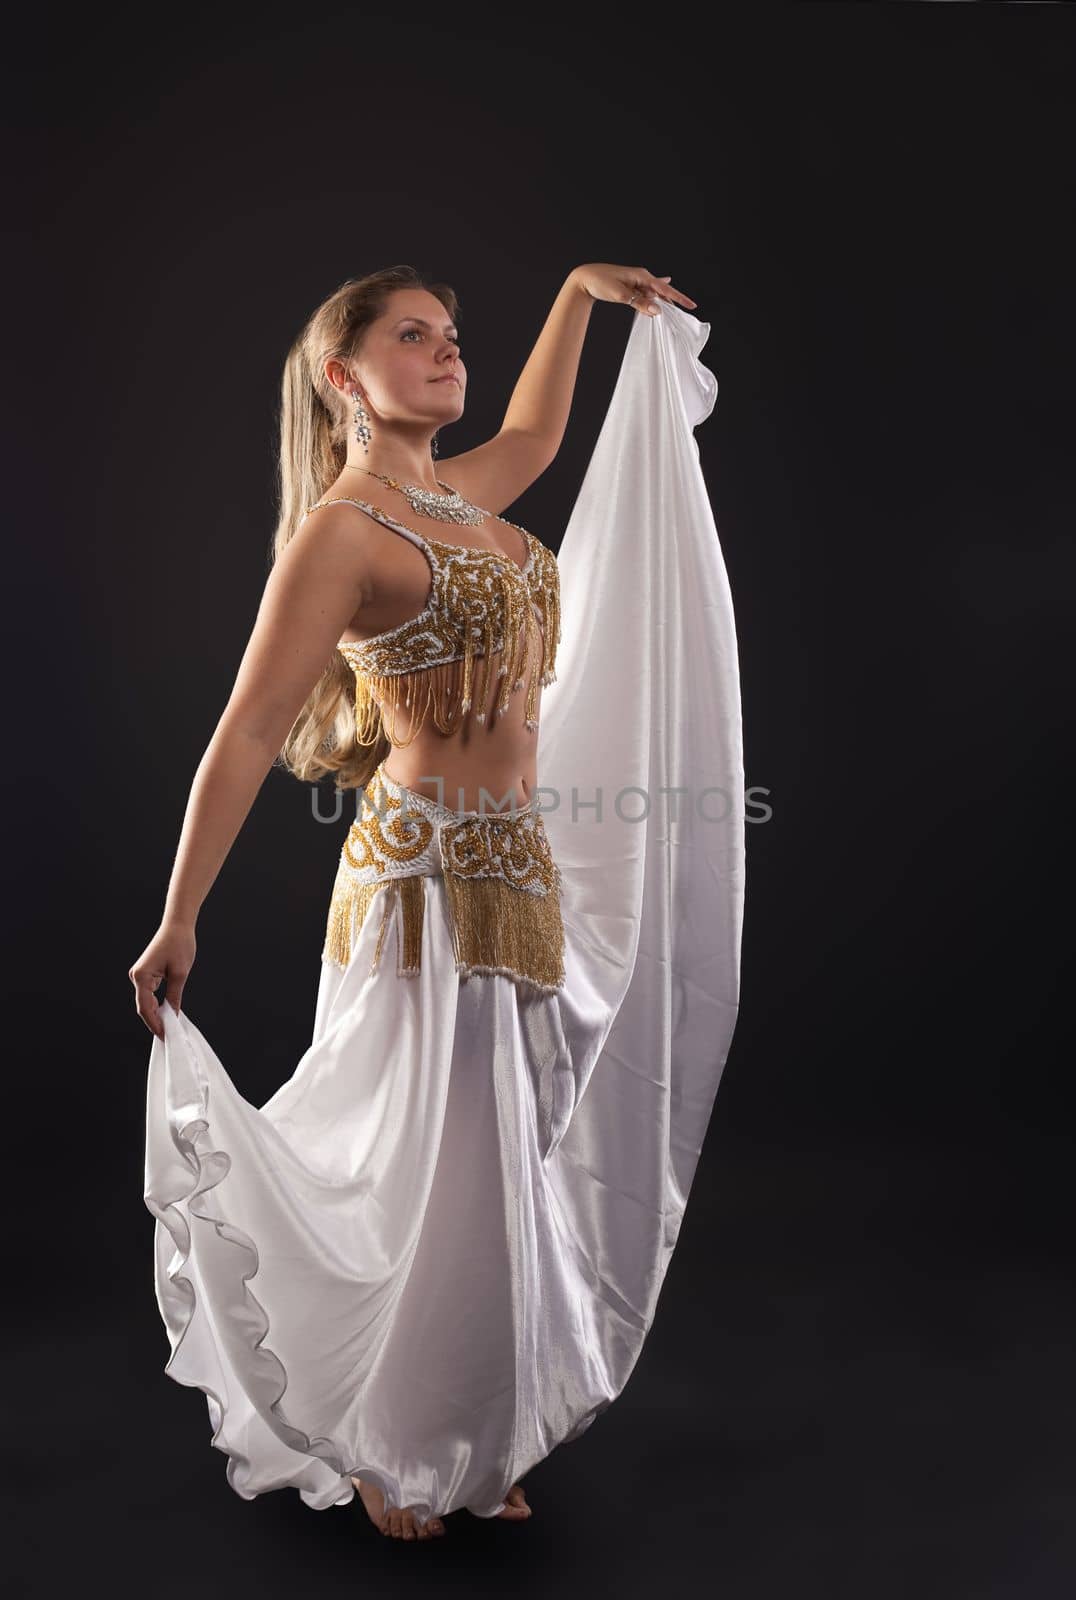 young woman dance in dark - white arabian costume by rivertime